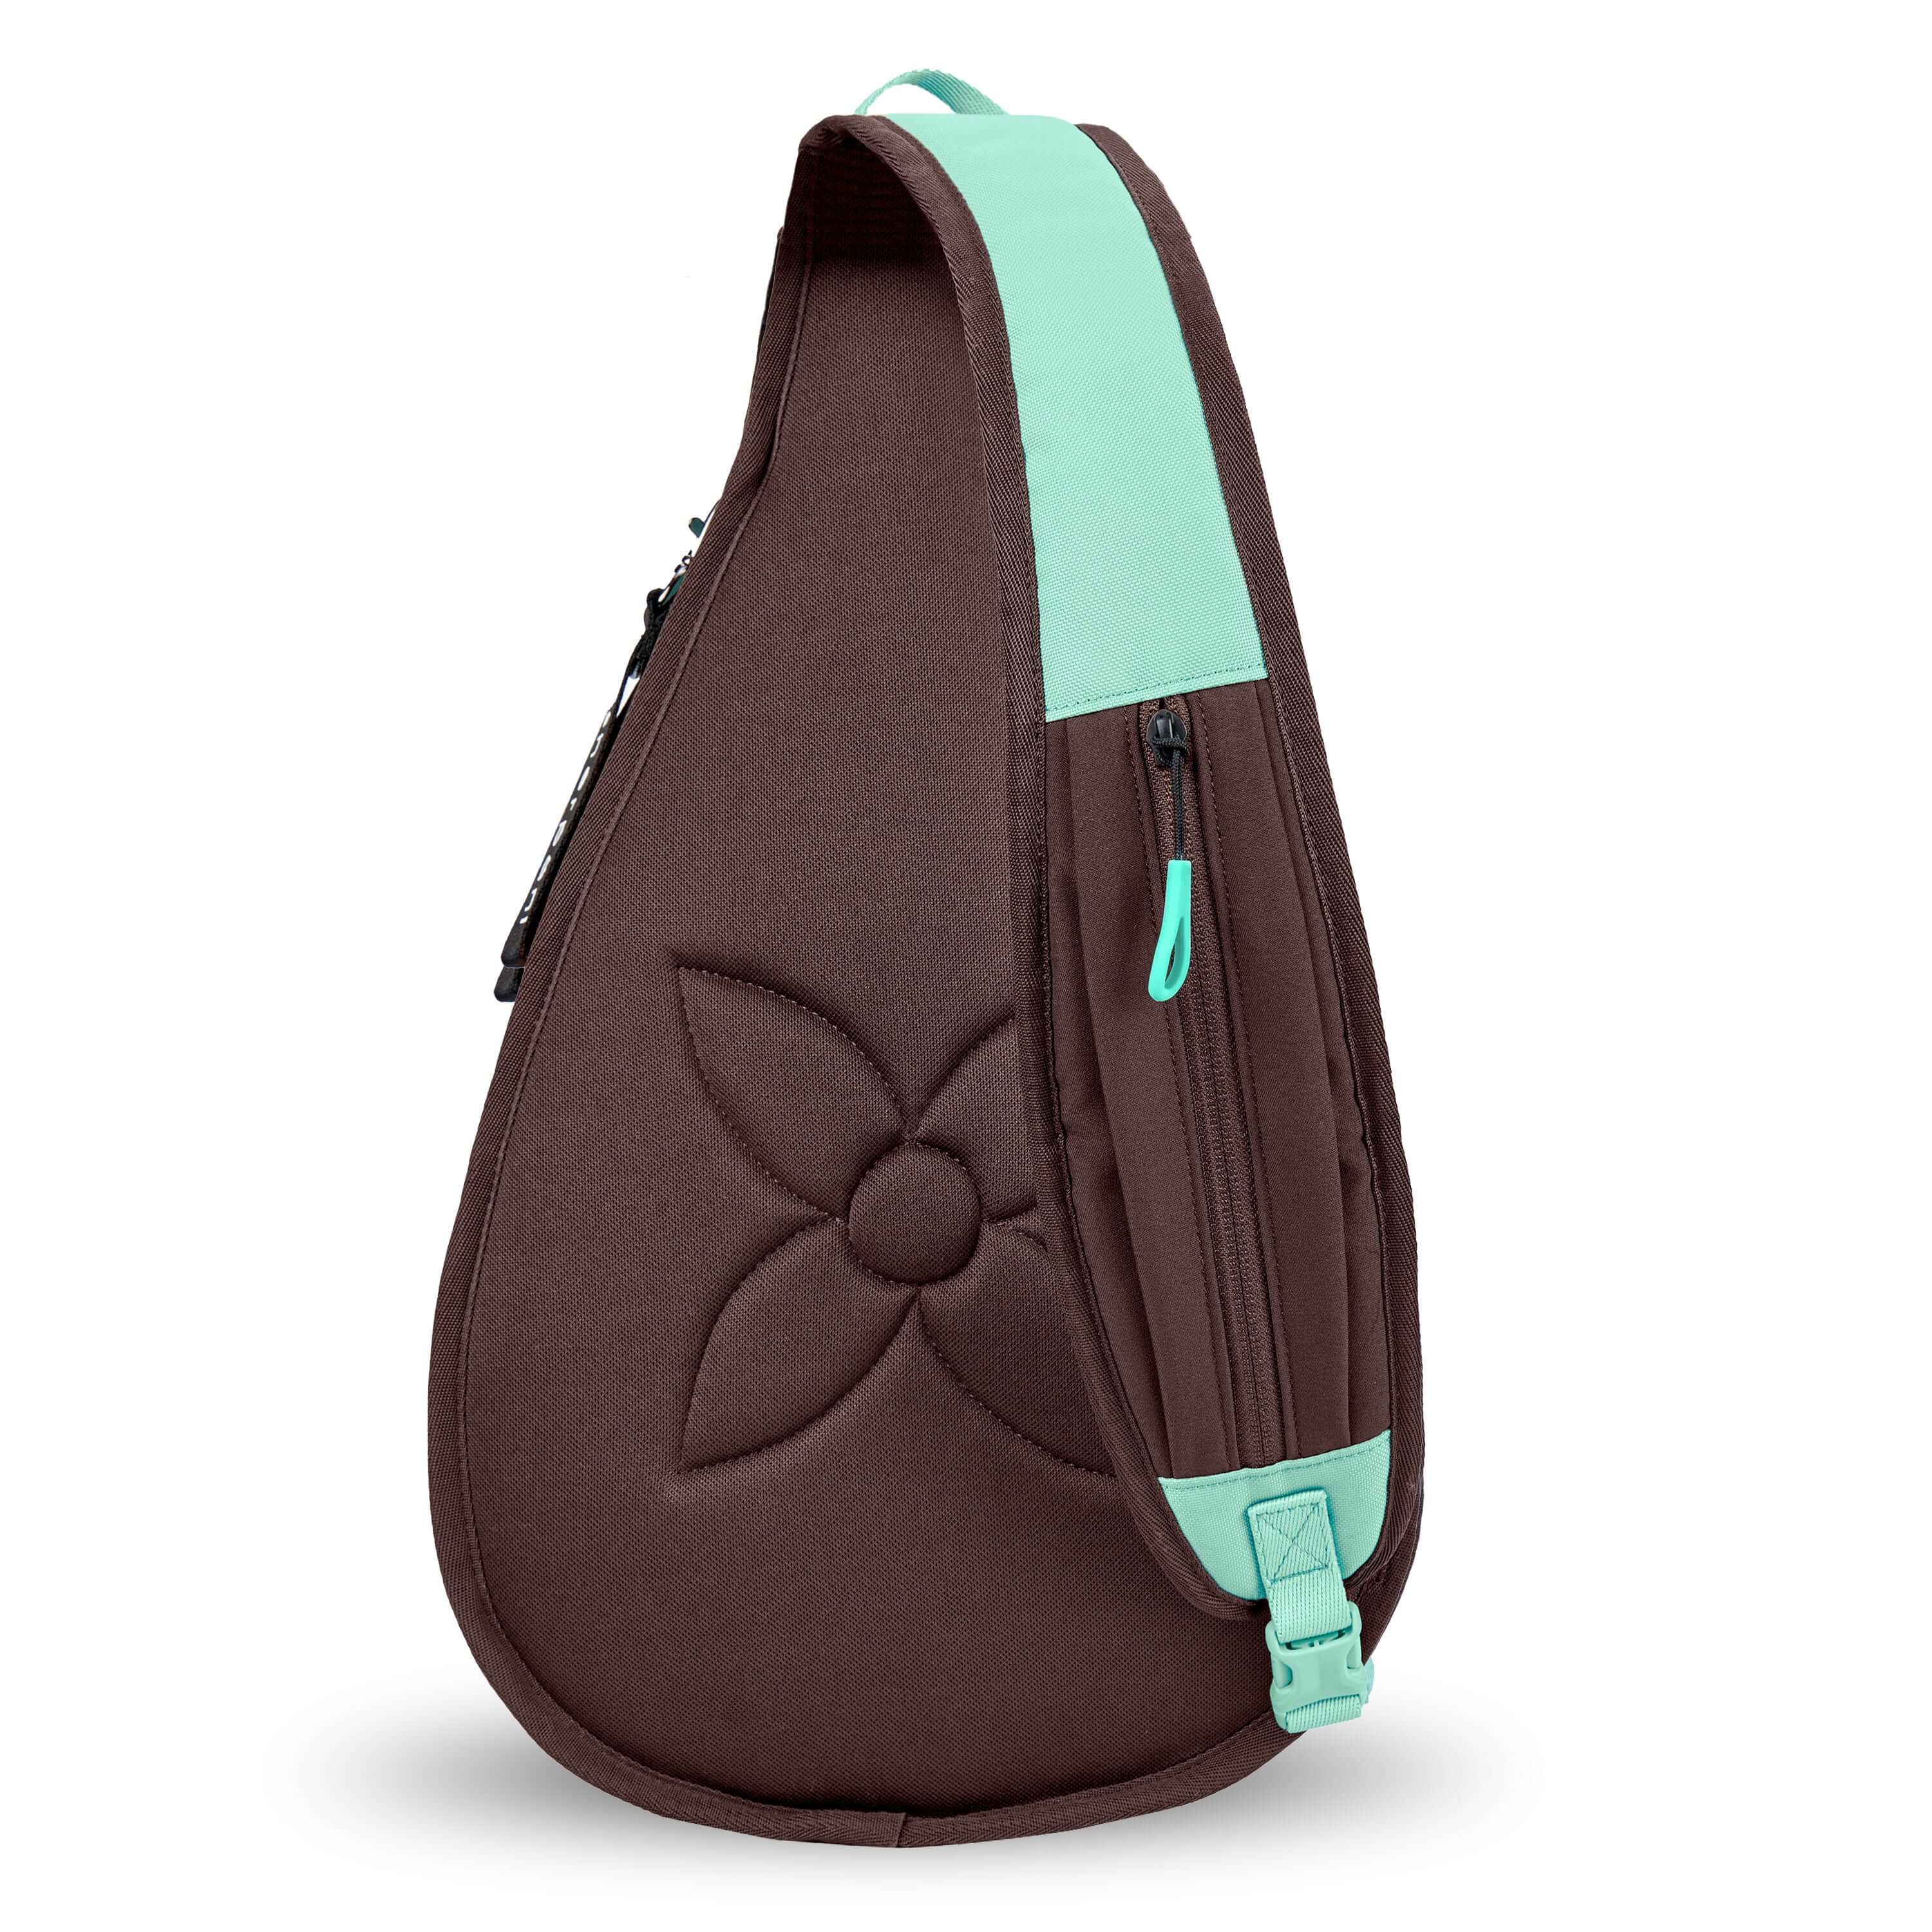 Back view of Sherpani's bag, the Esprit in Seagreen. There is a large edelweiss stitched into fabric. The crossbody strap features a small zipper compartment and a buckle for ease. 